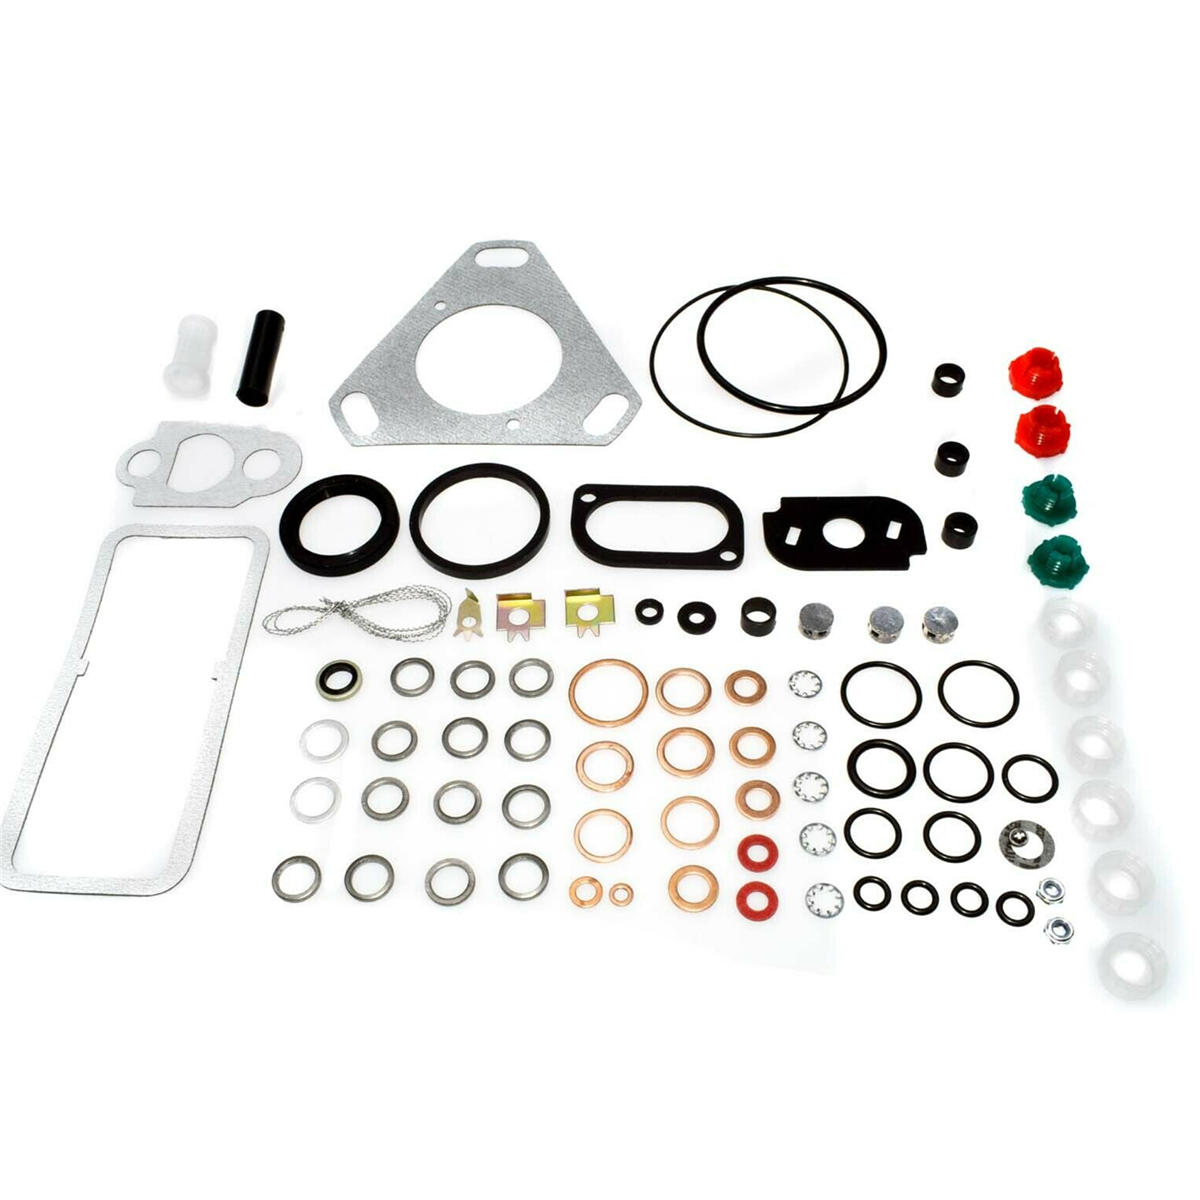 

7135-110 Injection Pump3/4/6 Cyl Seals Repair Kit For CAV Lucas R oto Diesel DPA Injection Engine